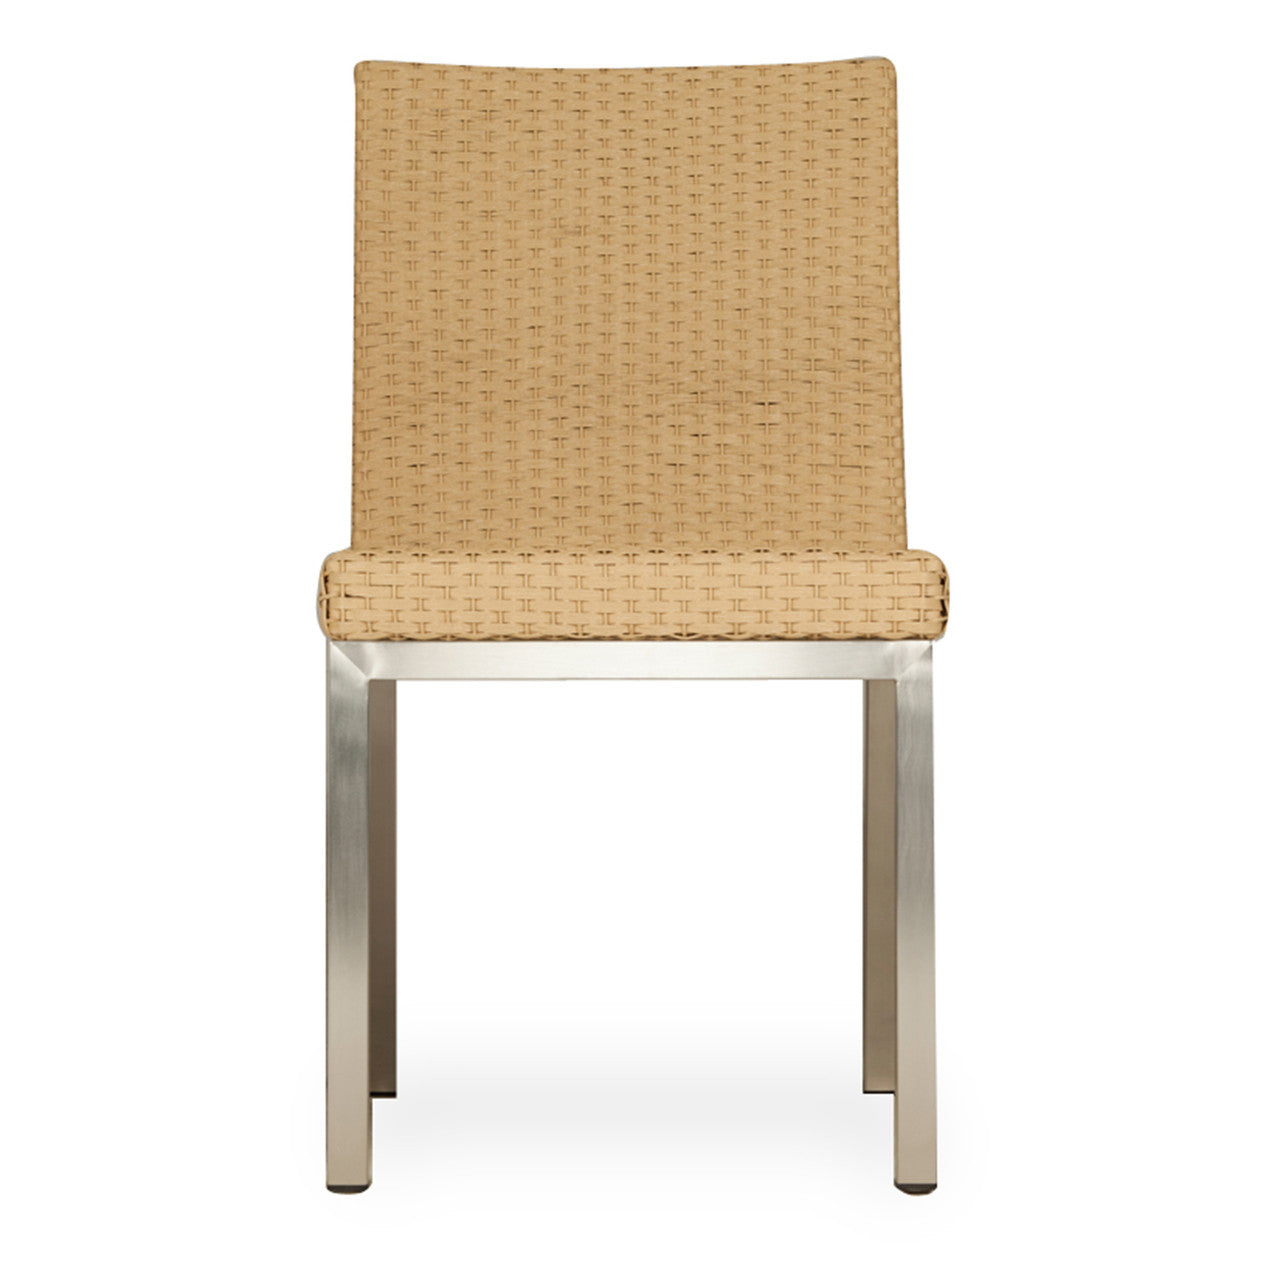 Lloyd Flanders Elements Wicker Armless Dining Chair With Stainless Steel Base